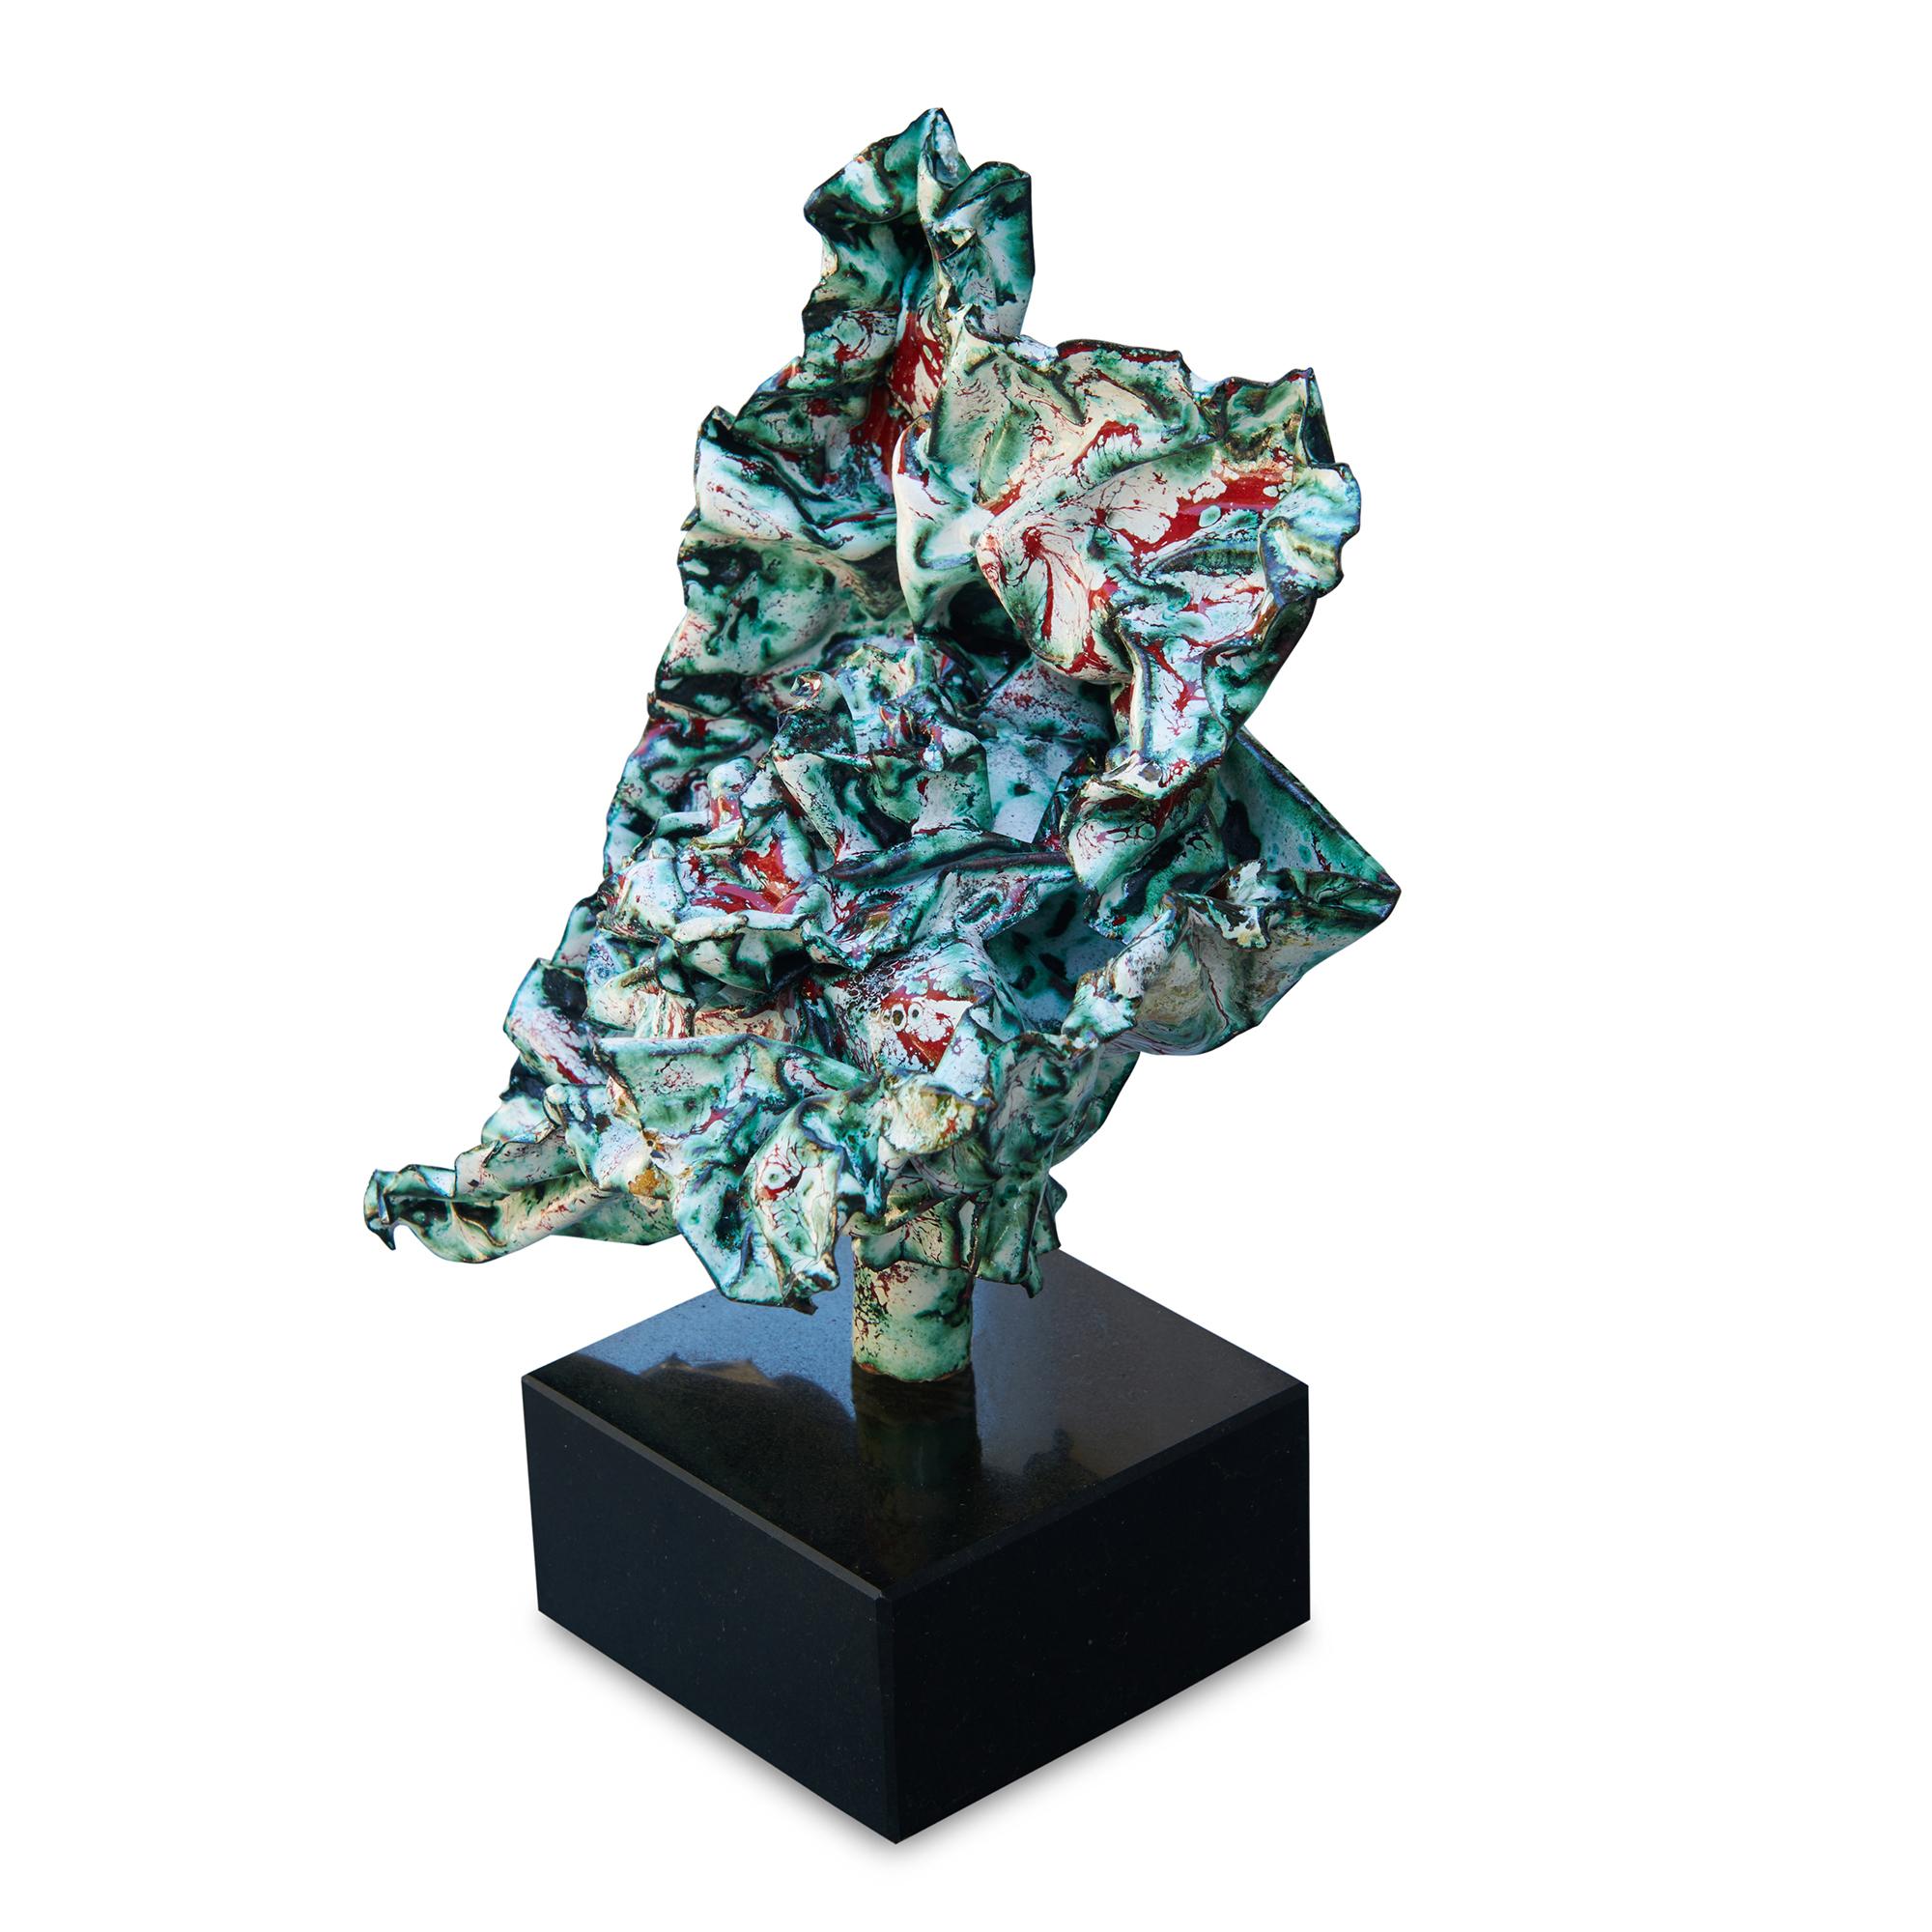 This visceral sculpture undulates with movement and colors of bright red on white.  Blacks and greens that emerged during the heating process appears throughout the sculpture, highlighting the intrigue of this fascinating and complex work of art.  